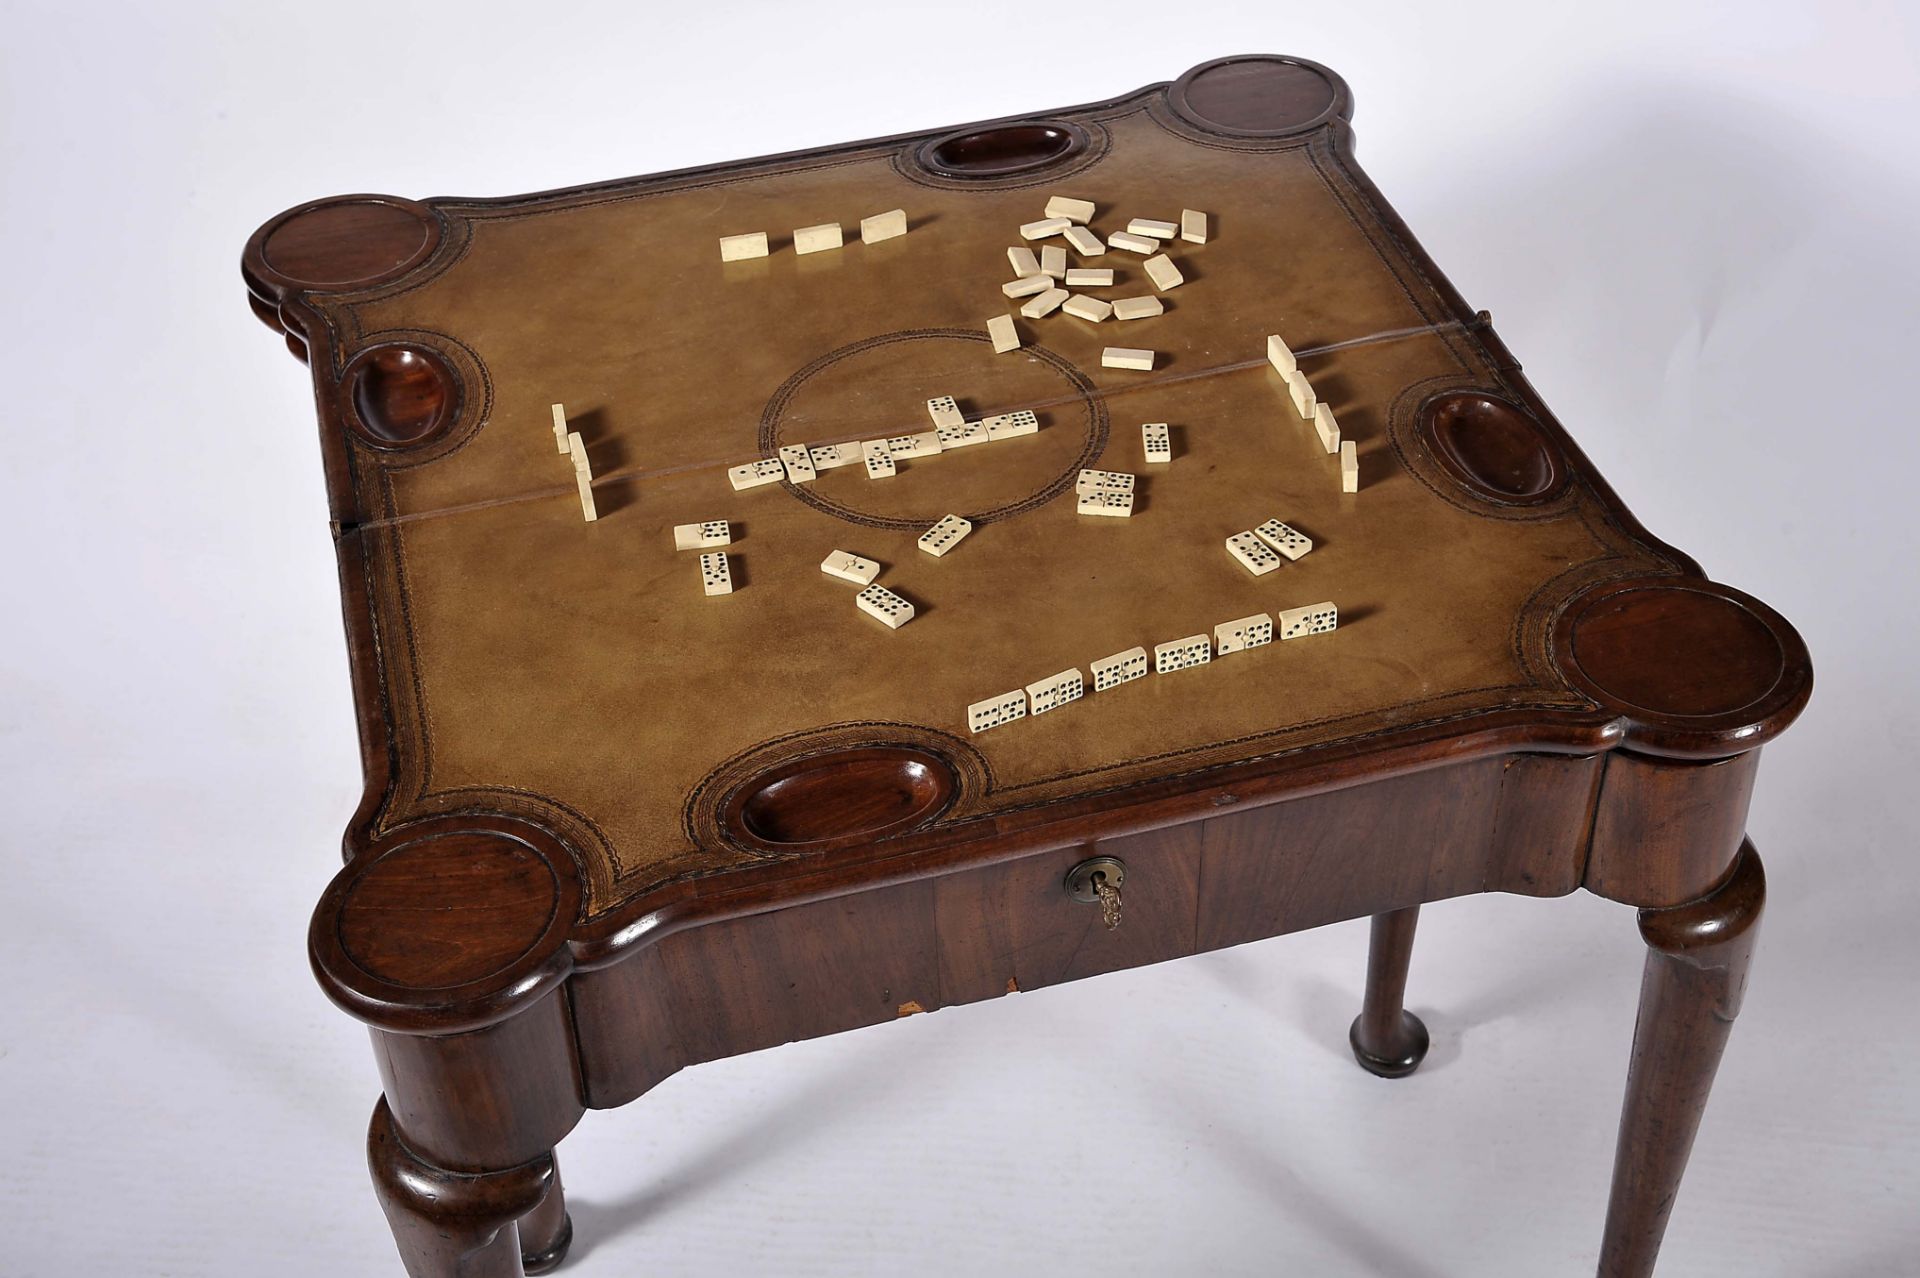 A five-legged game and tea table with different tops - tea, cards, chess and backgammon - Image 5 of 12